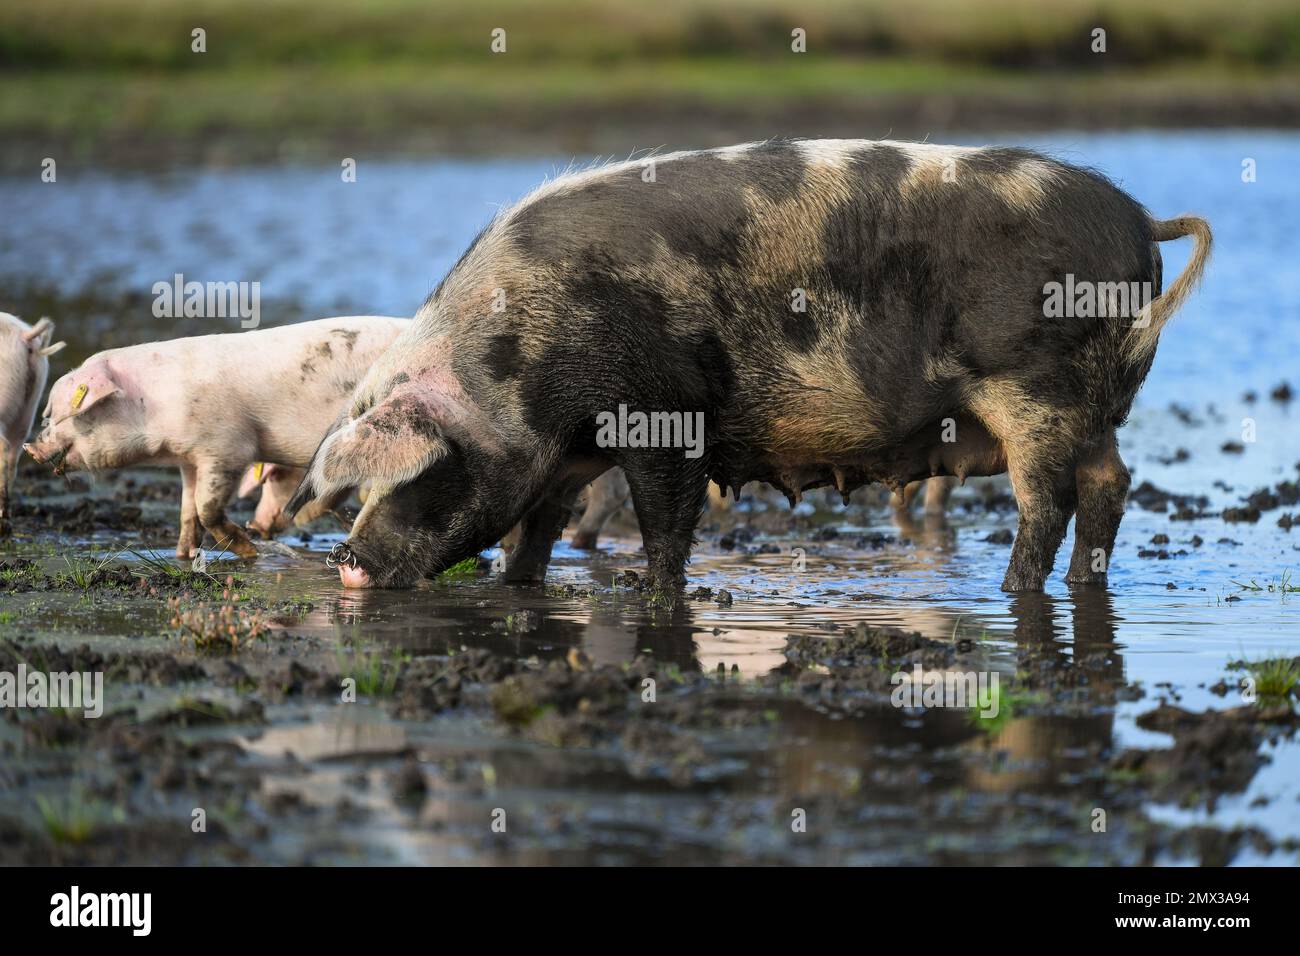 A large sow pig with her piglets drinking in the mud and water in the New Forest Hampshire England during pannage season when pigs are free to roam. Stock Photo